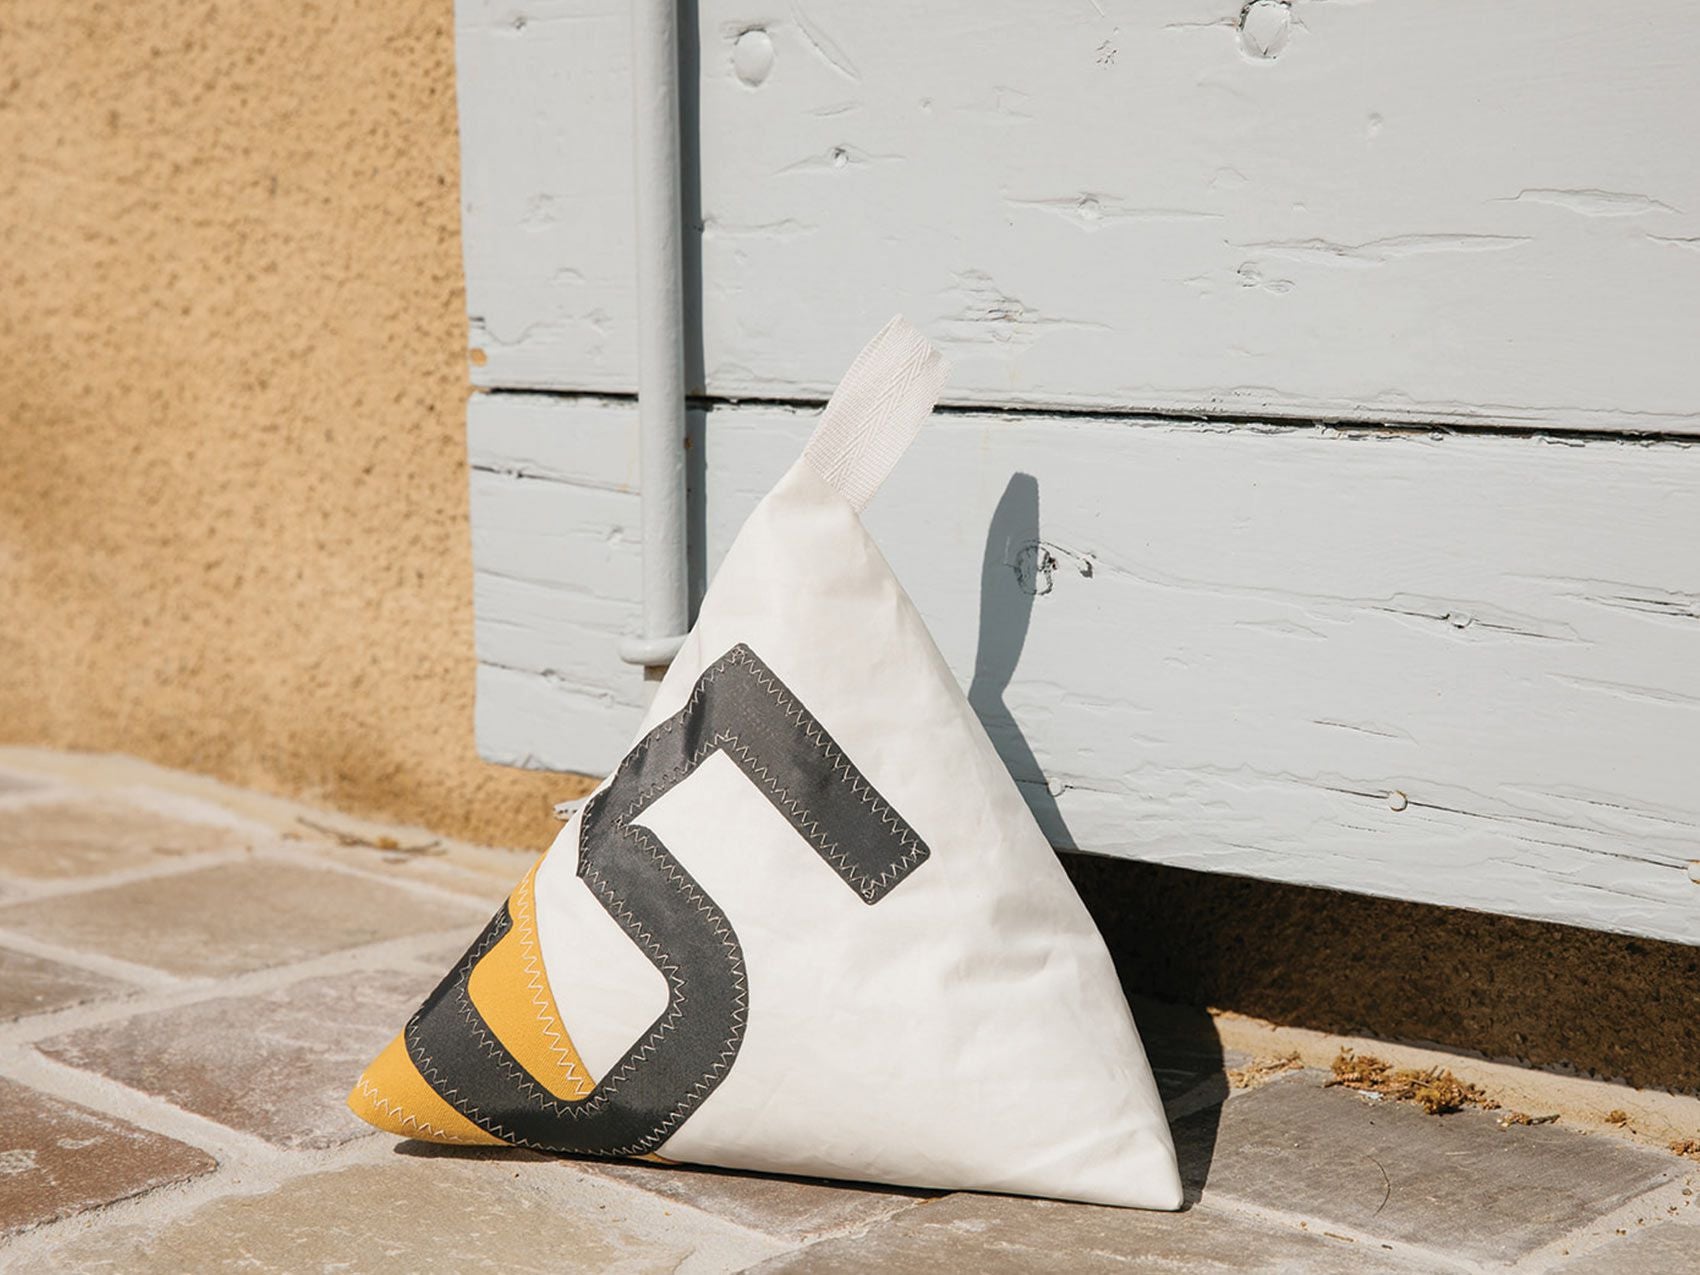 Made of white and grey Dacron sail, with yellow marine-grade canvas corner and adorned with an oversized grey number '5', this pyramid-shaped door stopper will add a splash of colour and nautical character to your interior!